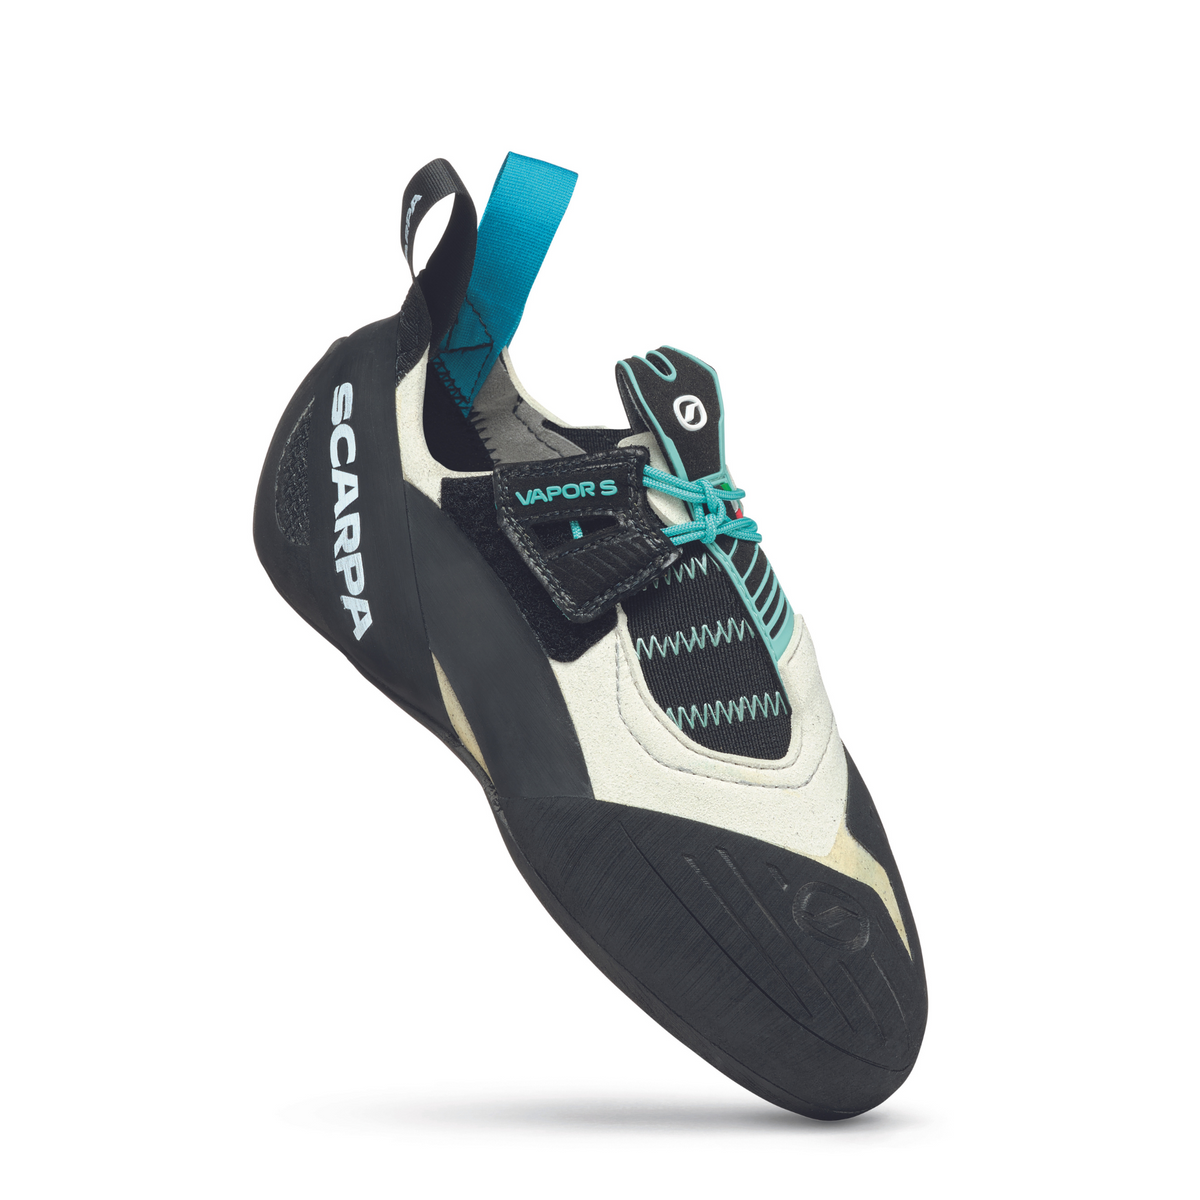 Scarpa Vapour S Womens in Dust Grey-Aqua. side view showing logo and removable strap